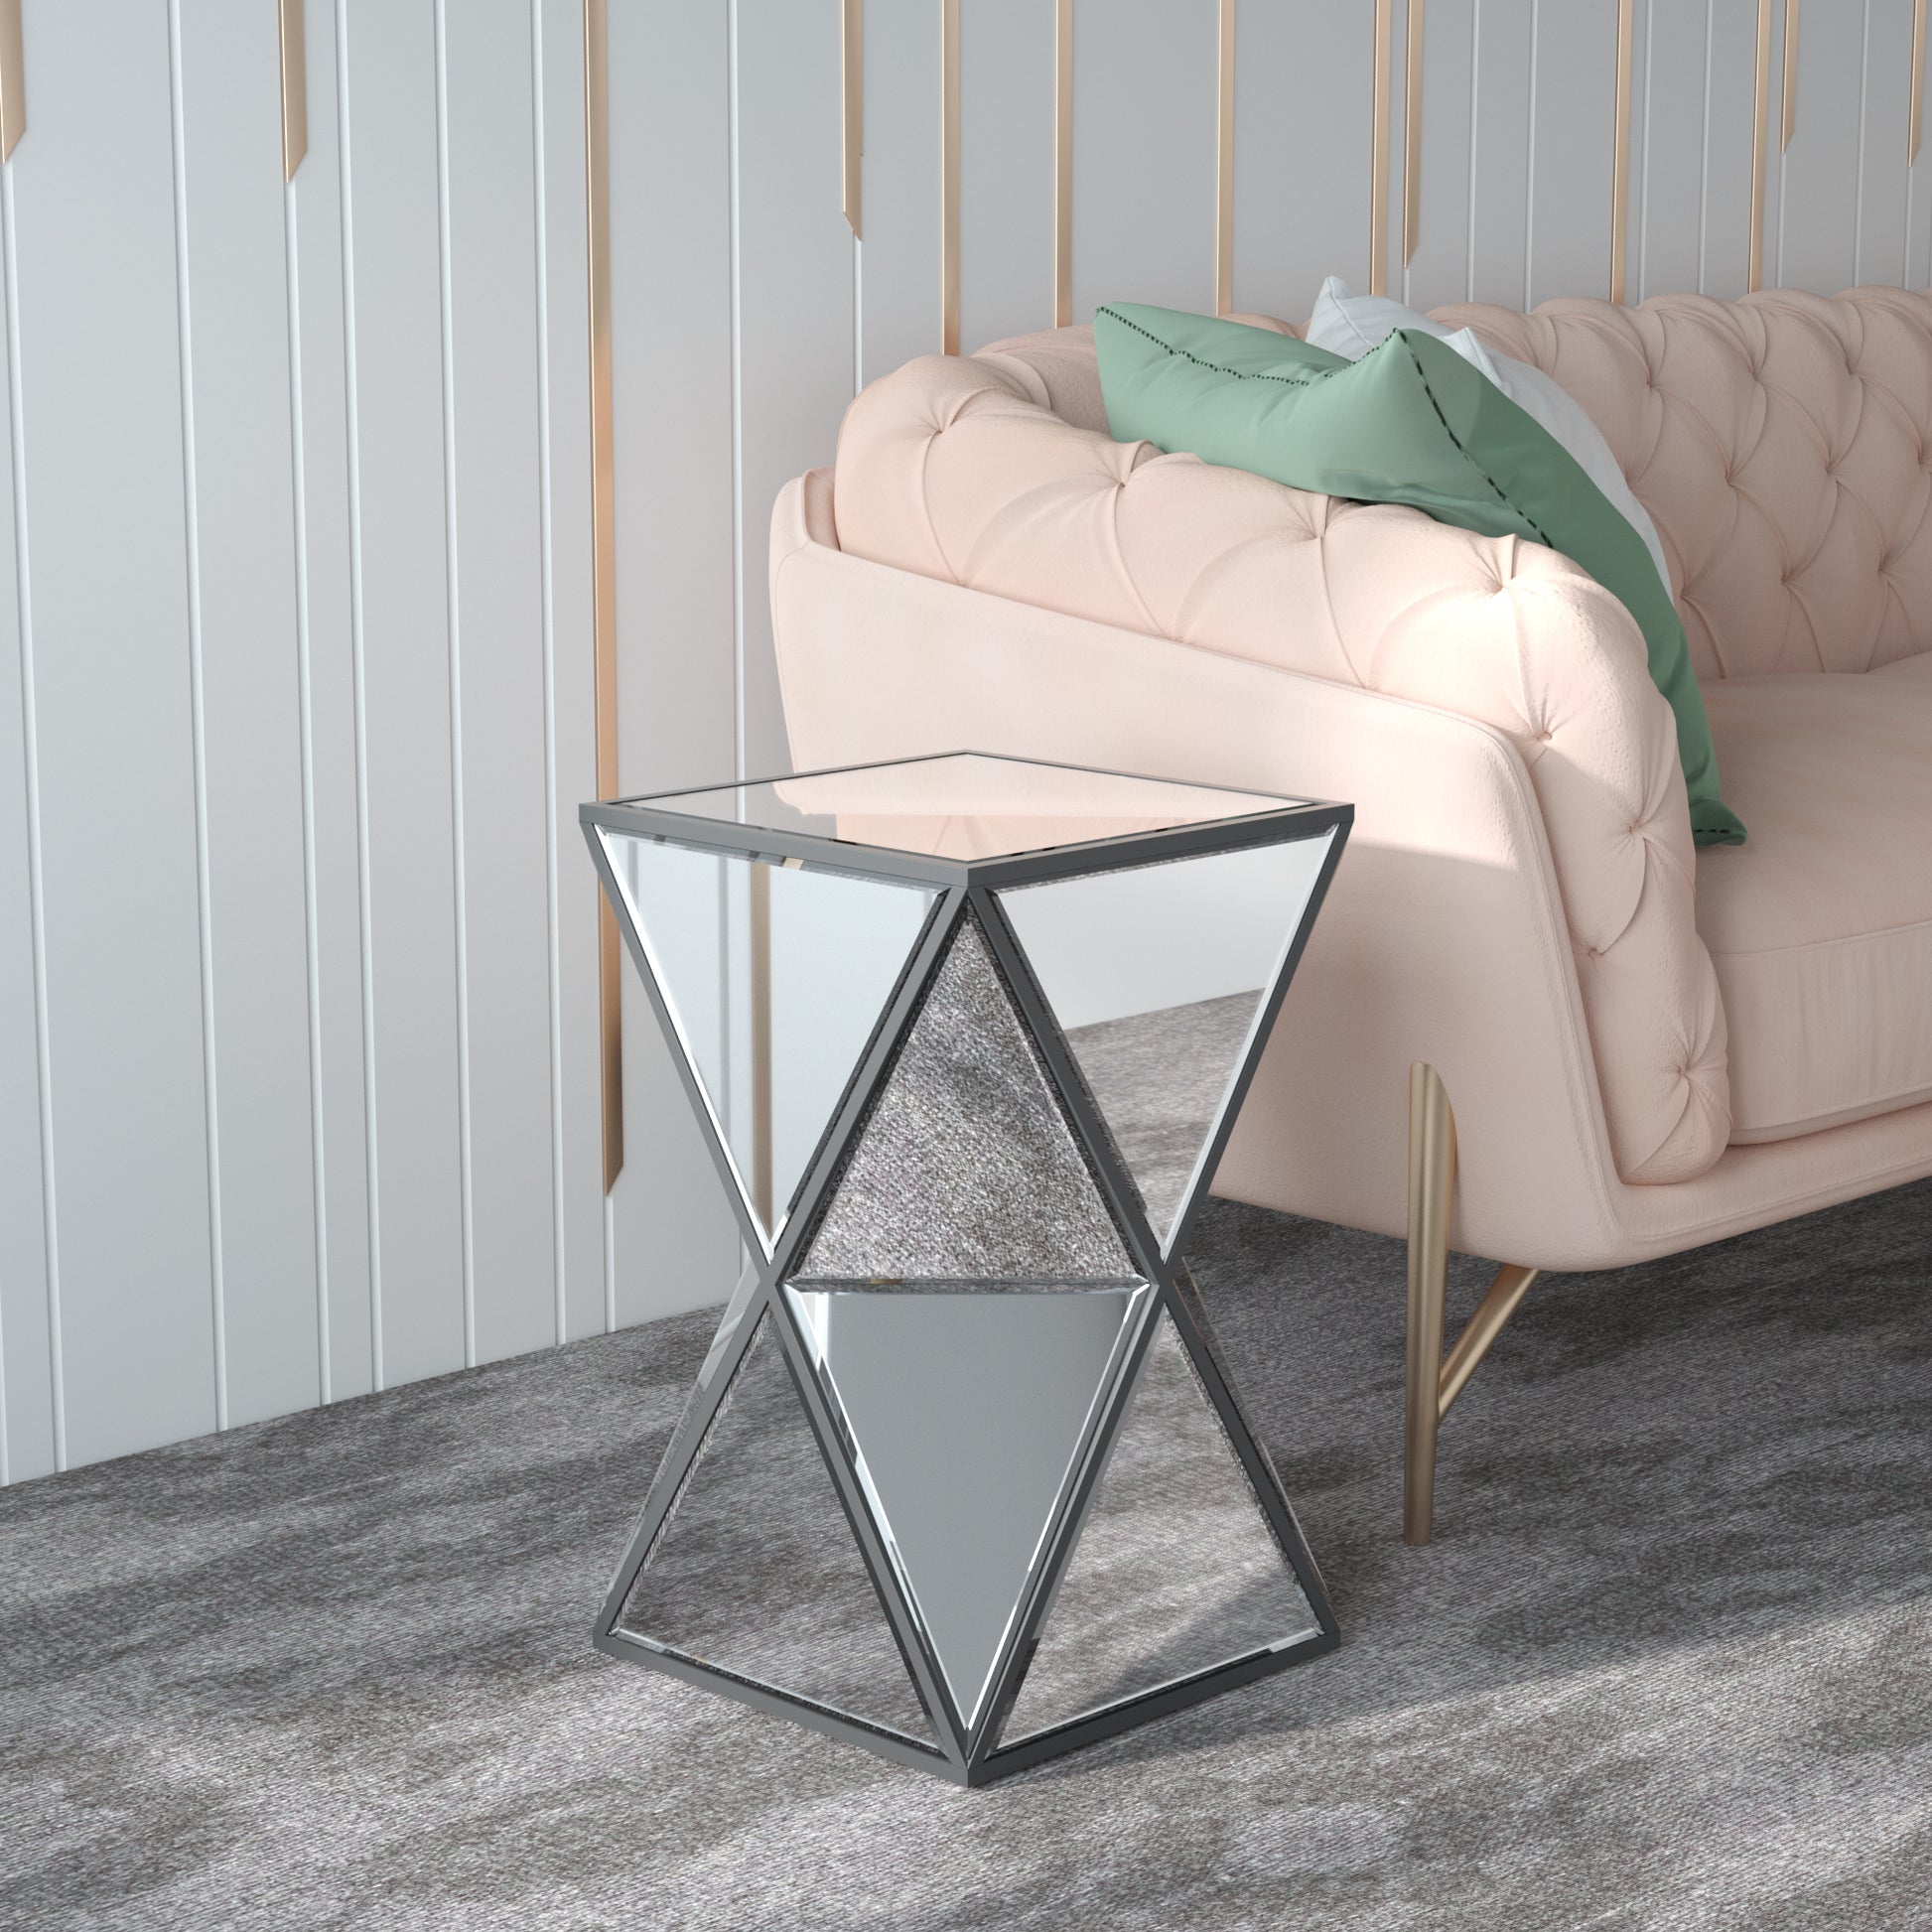 Mirrored End Table, Mirrored Nightstand, Silver Side Table for Bedroom Living Room - Enova Luxe Home Store